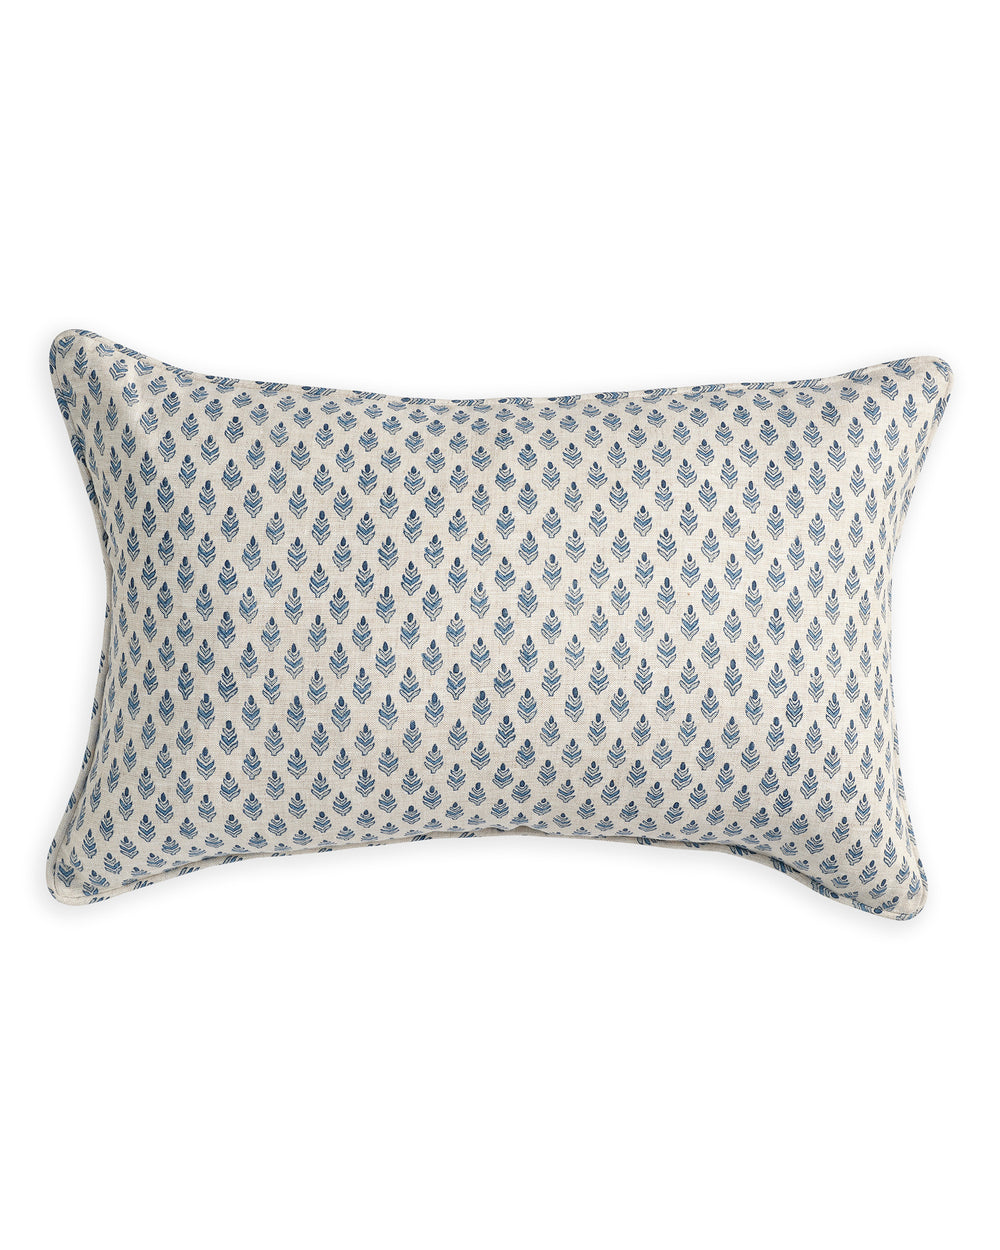 Sula Tahoe Pillow